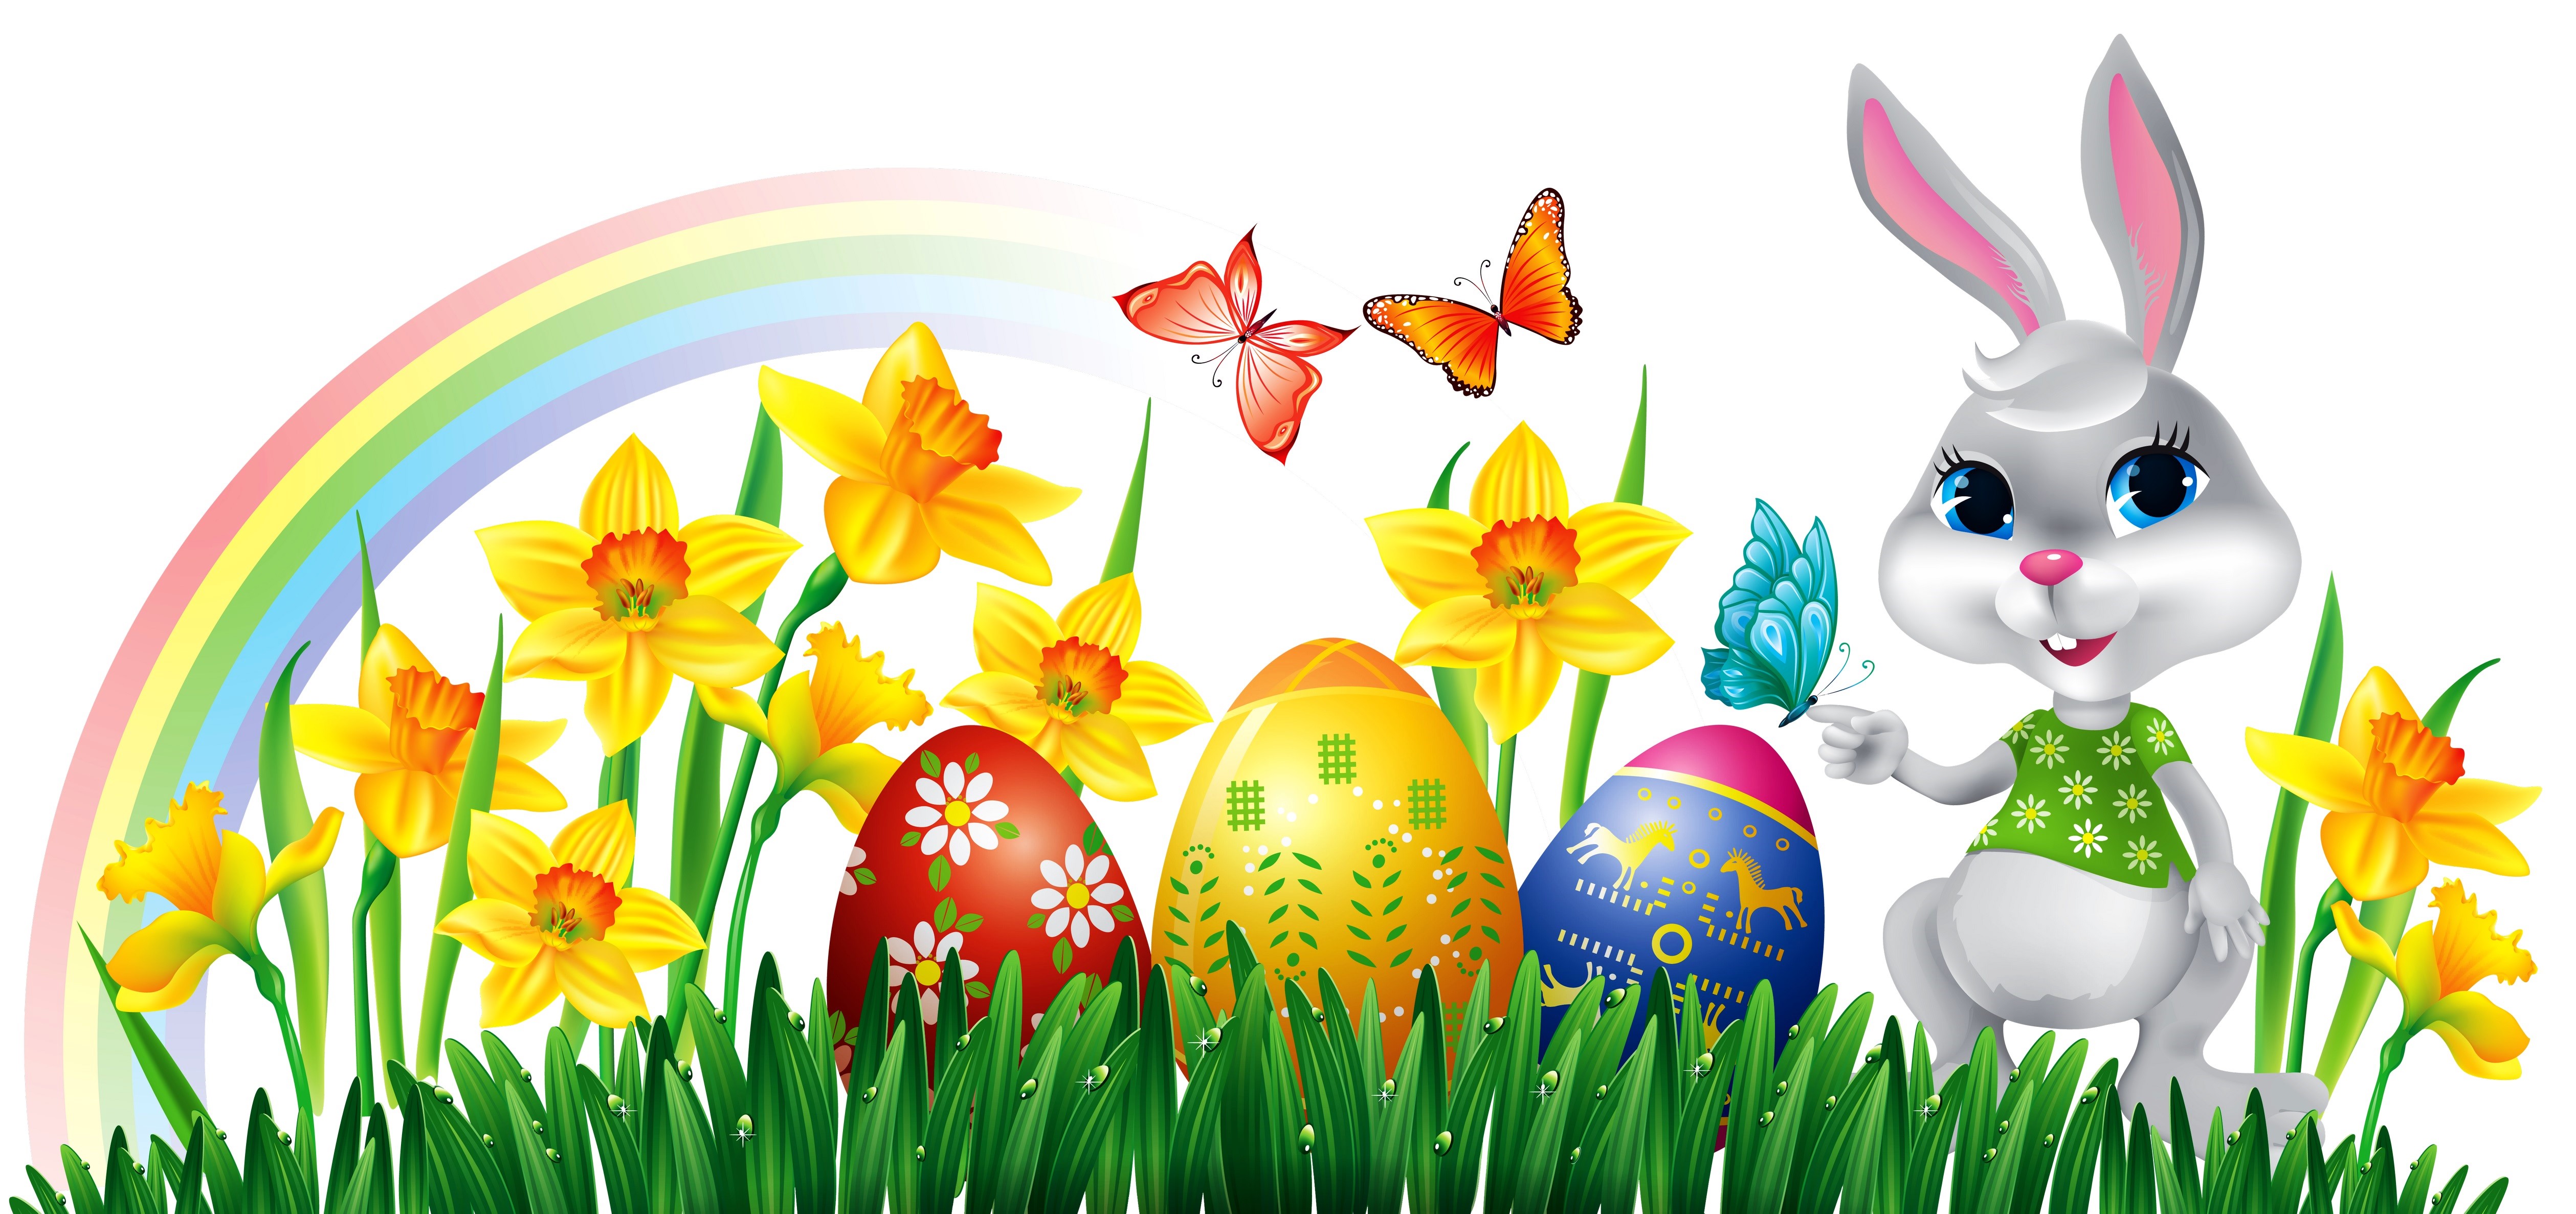 Bunny Butterfly Colorful Daffodil Easter Easter Egg Grass Holiday Rainbow 5036x2373